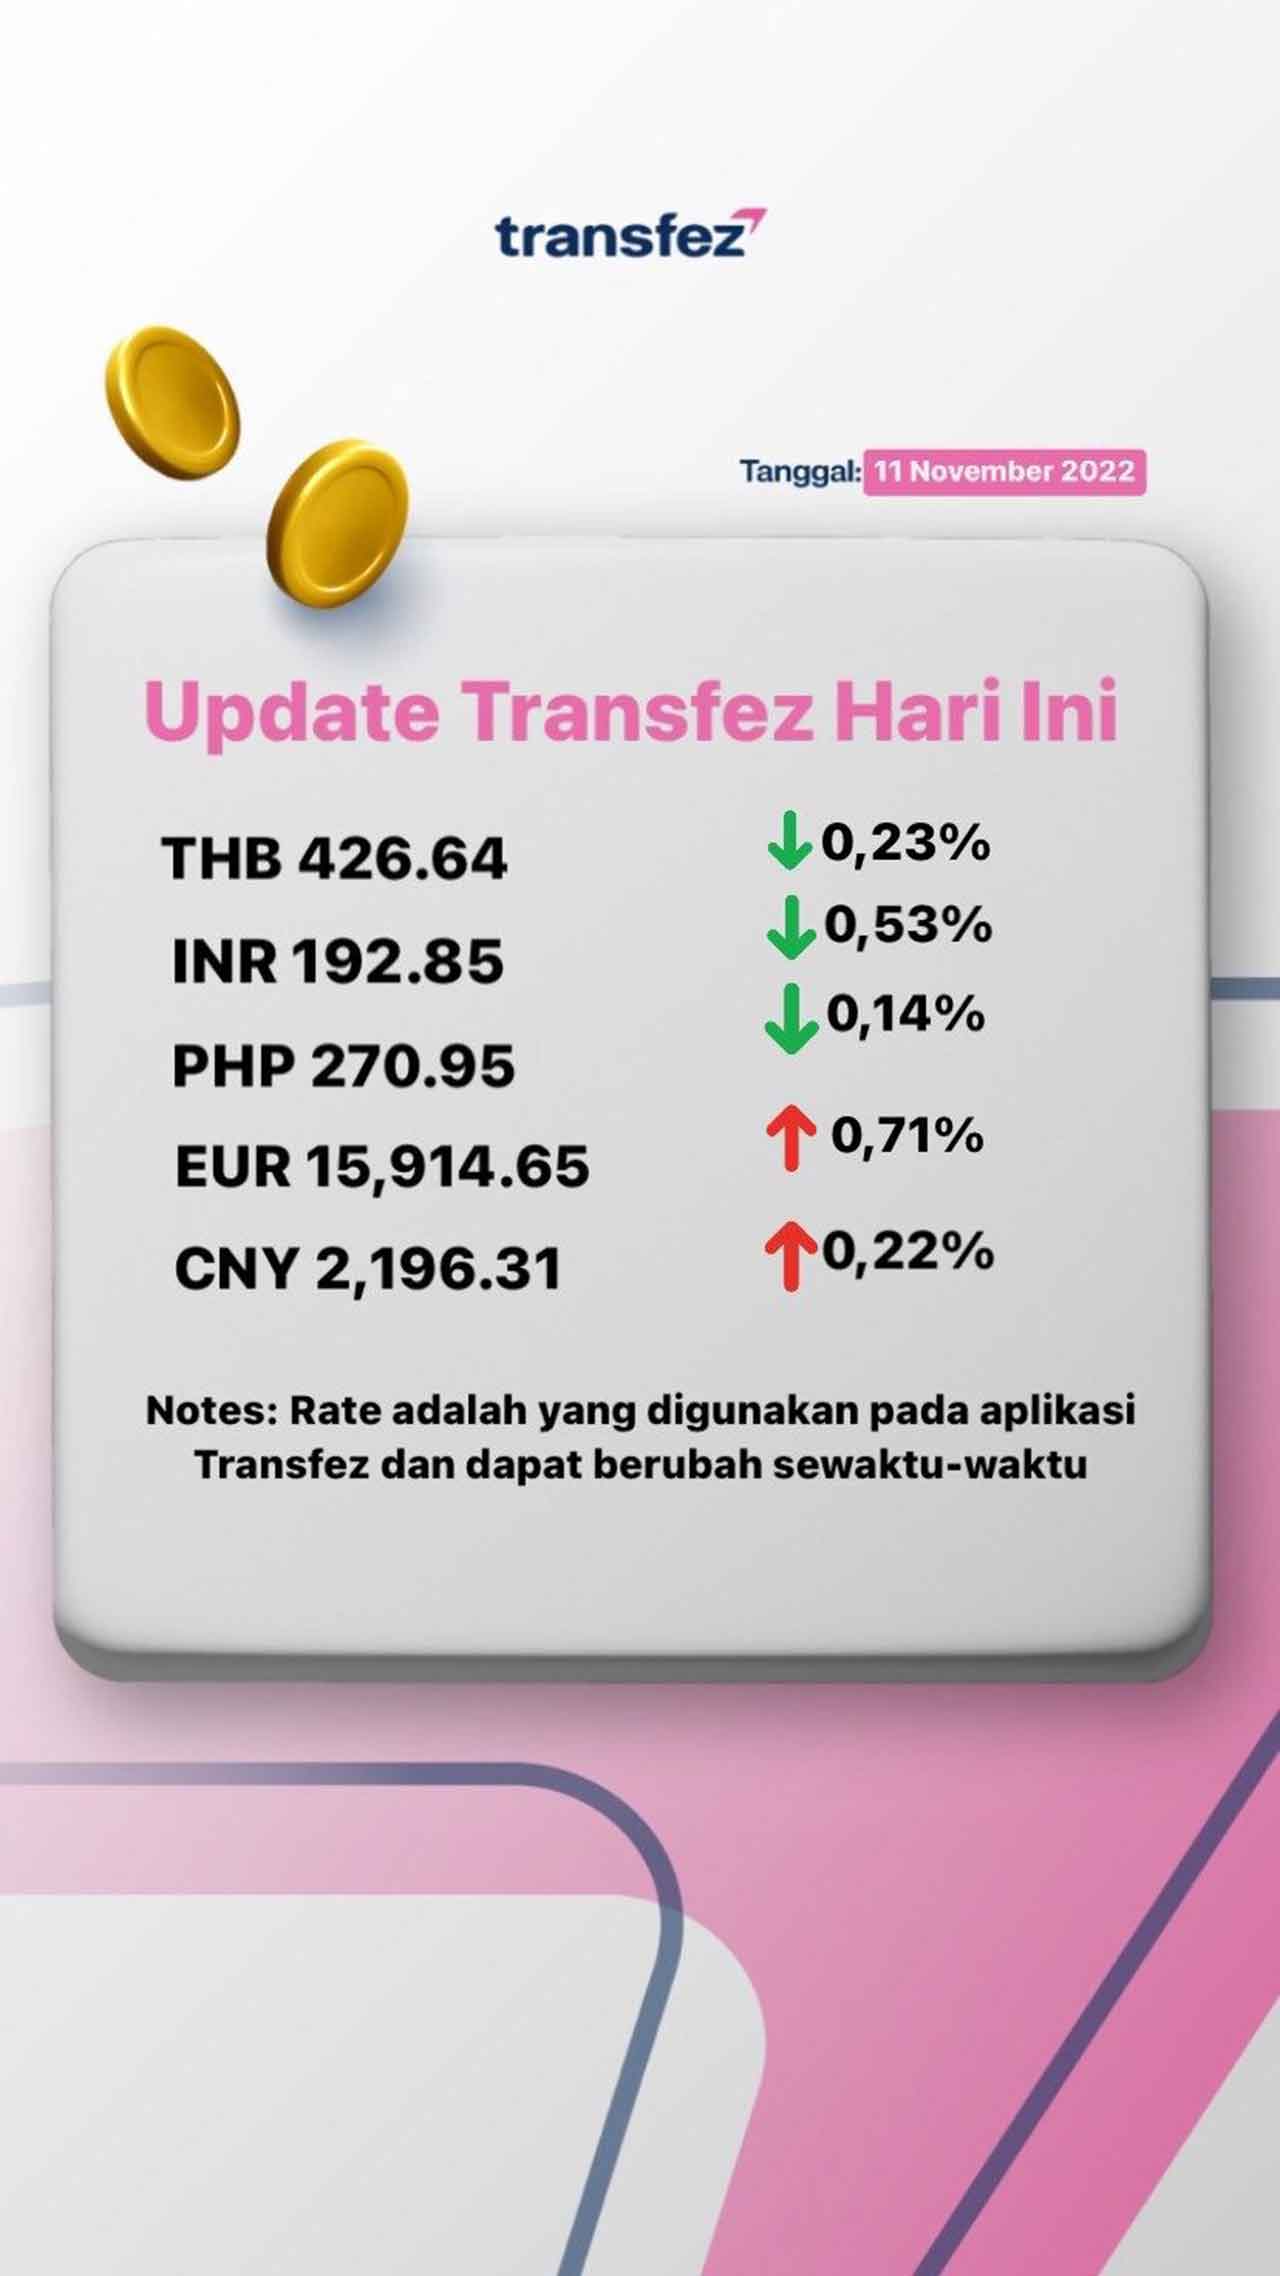 Today's Transfez Rate Update 11 November 2022